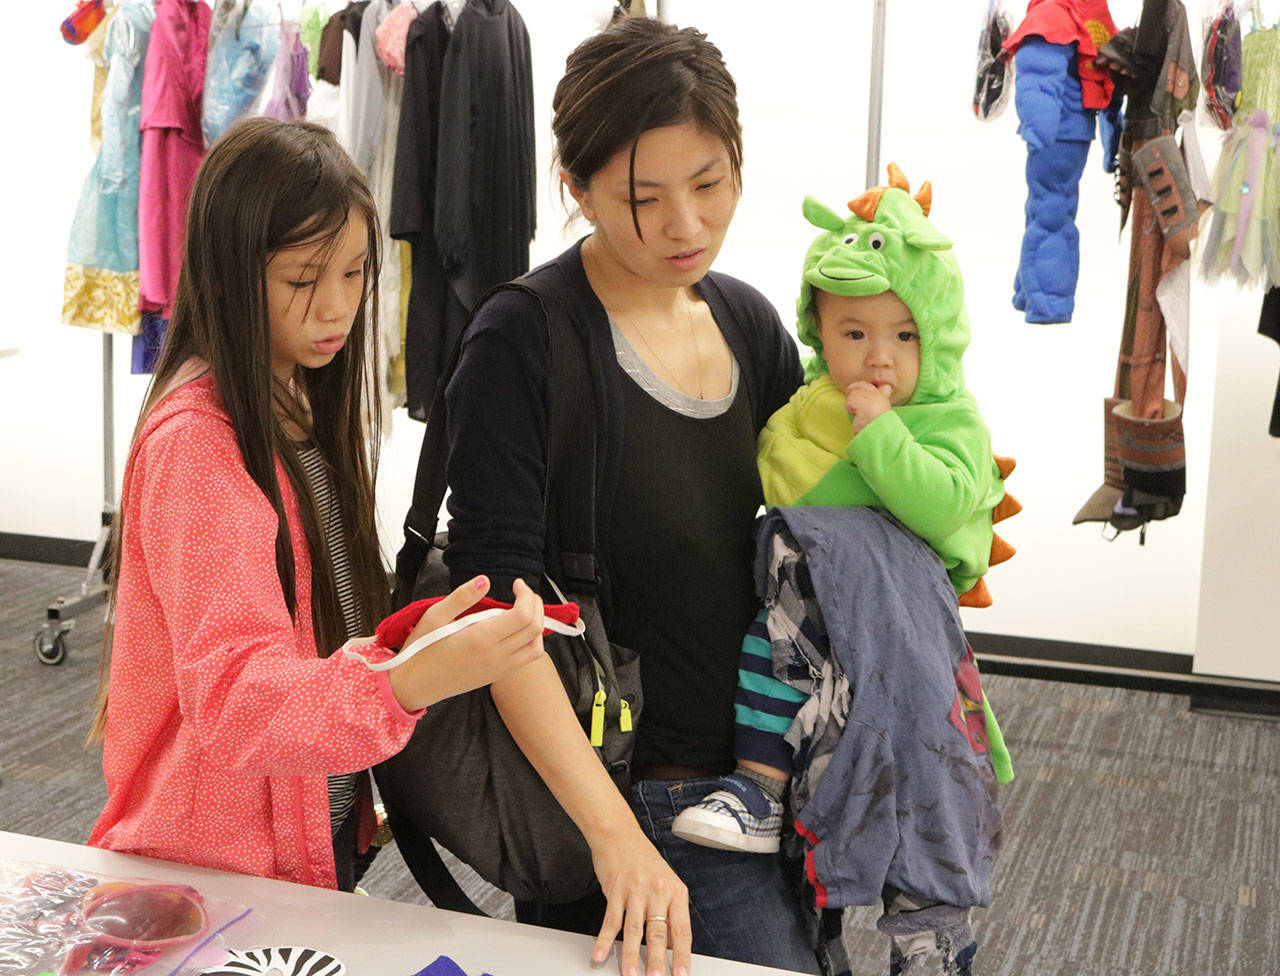 From left to right: Kayla Livingston, 10, her mom, Aiko, and 13-month-old Liam shop around for accessories during the City of Kirkland’s Halloween Costume Swap. Megan Campbell/Kirkland Reporter